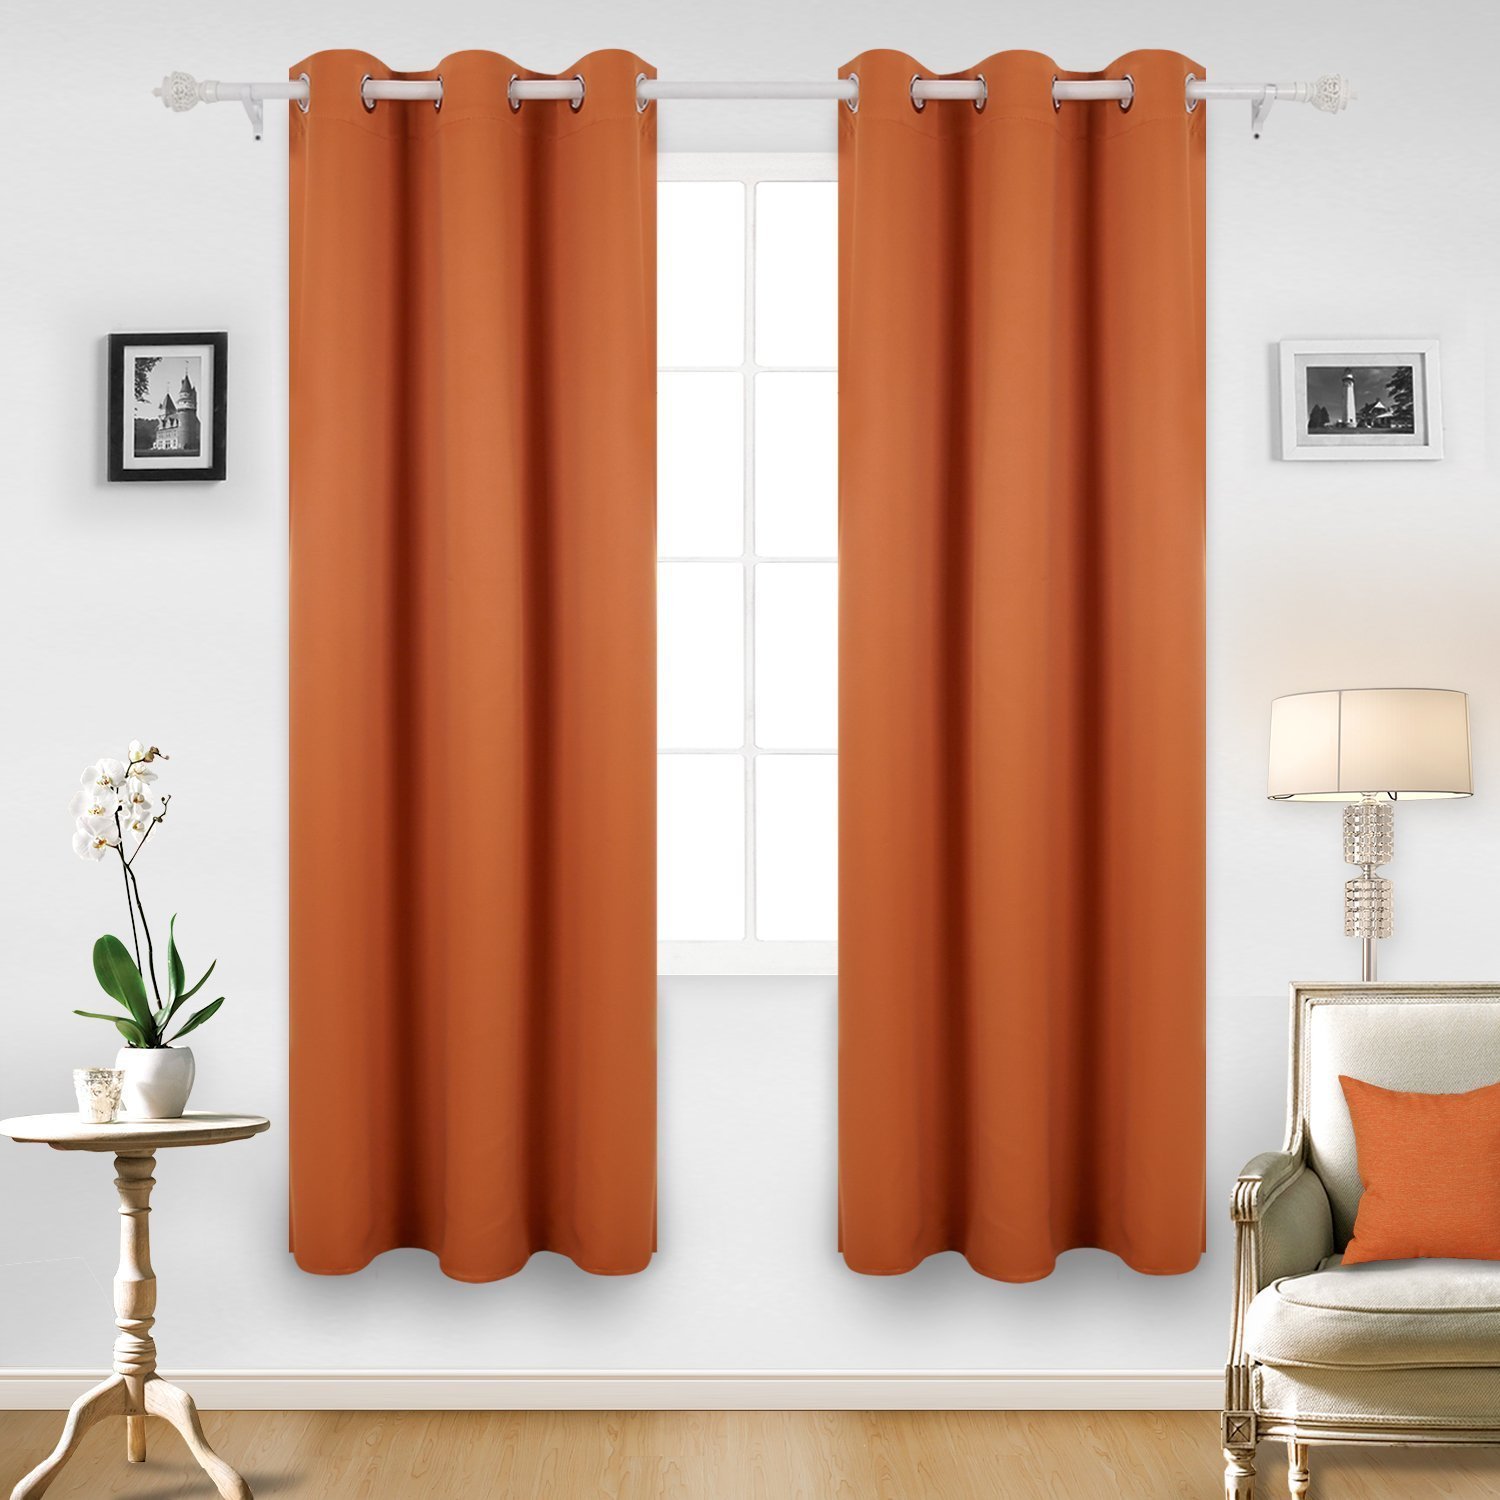 HOMEIDEAS Baby Pink Blackout Curtains for Bedroom 52 X 63 Inch Length 2 Panels Set Room Darkening Curtains/Drapes Soundproof Thermal Grommet Window Curtains for Nursery Room 